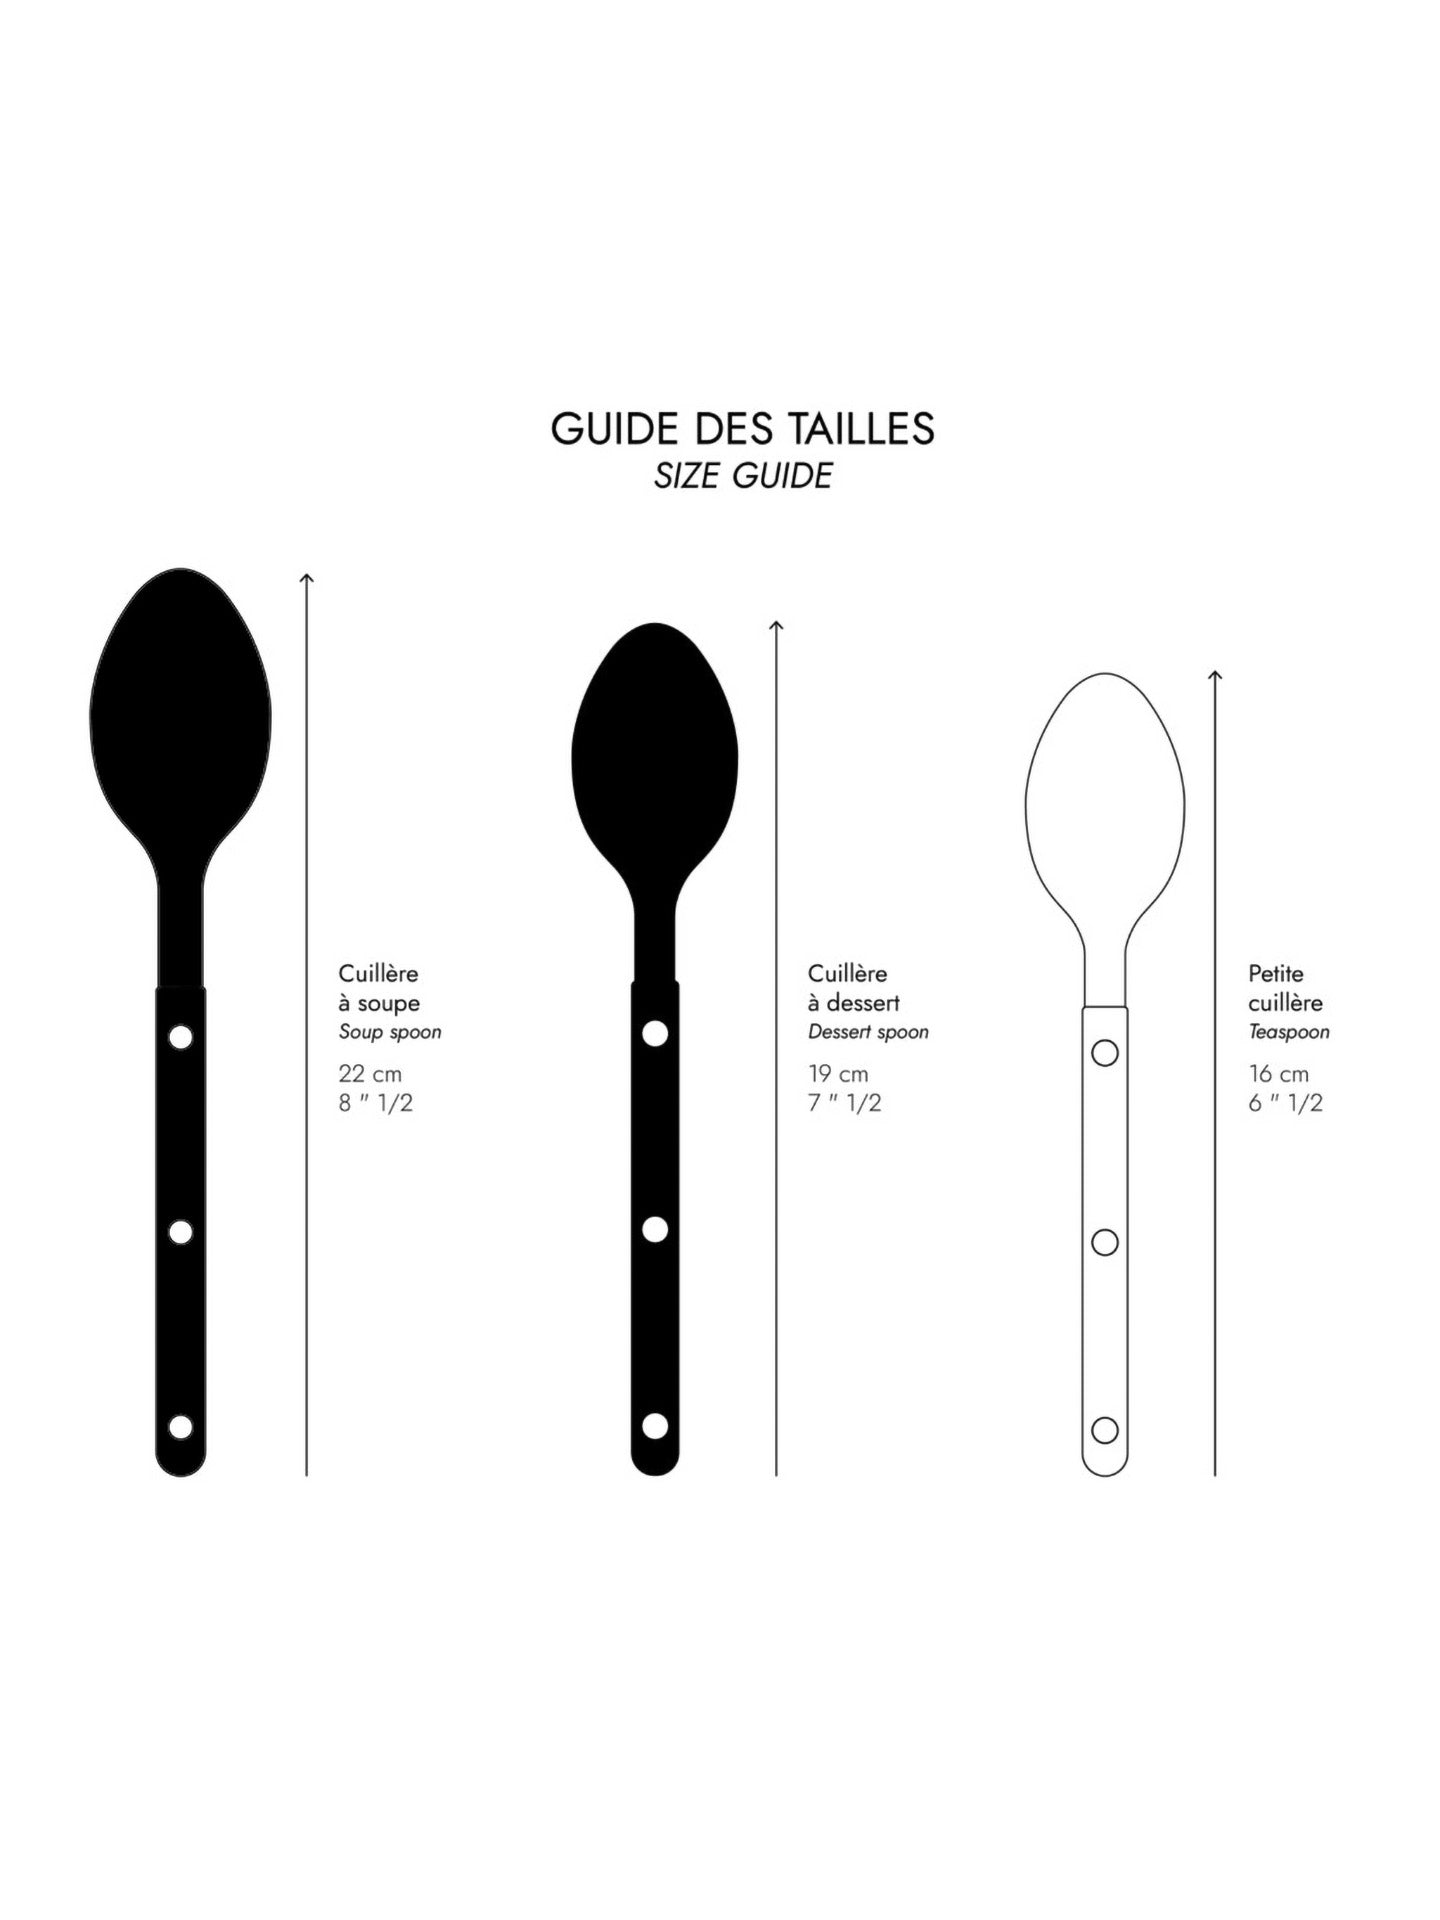 The Bistro teaspoon is small spoon, standing just 16 cm tall.